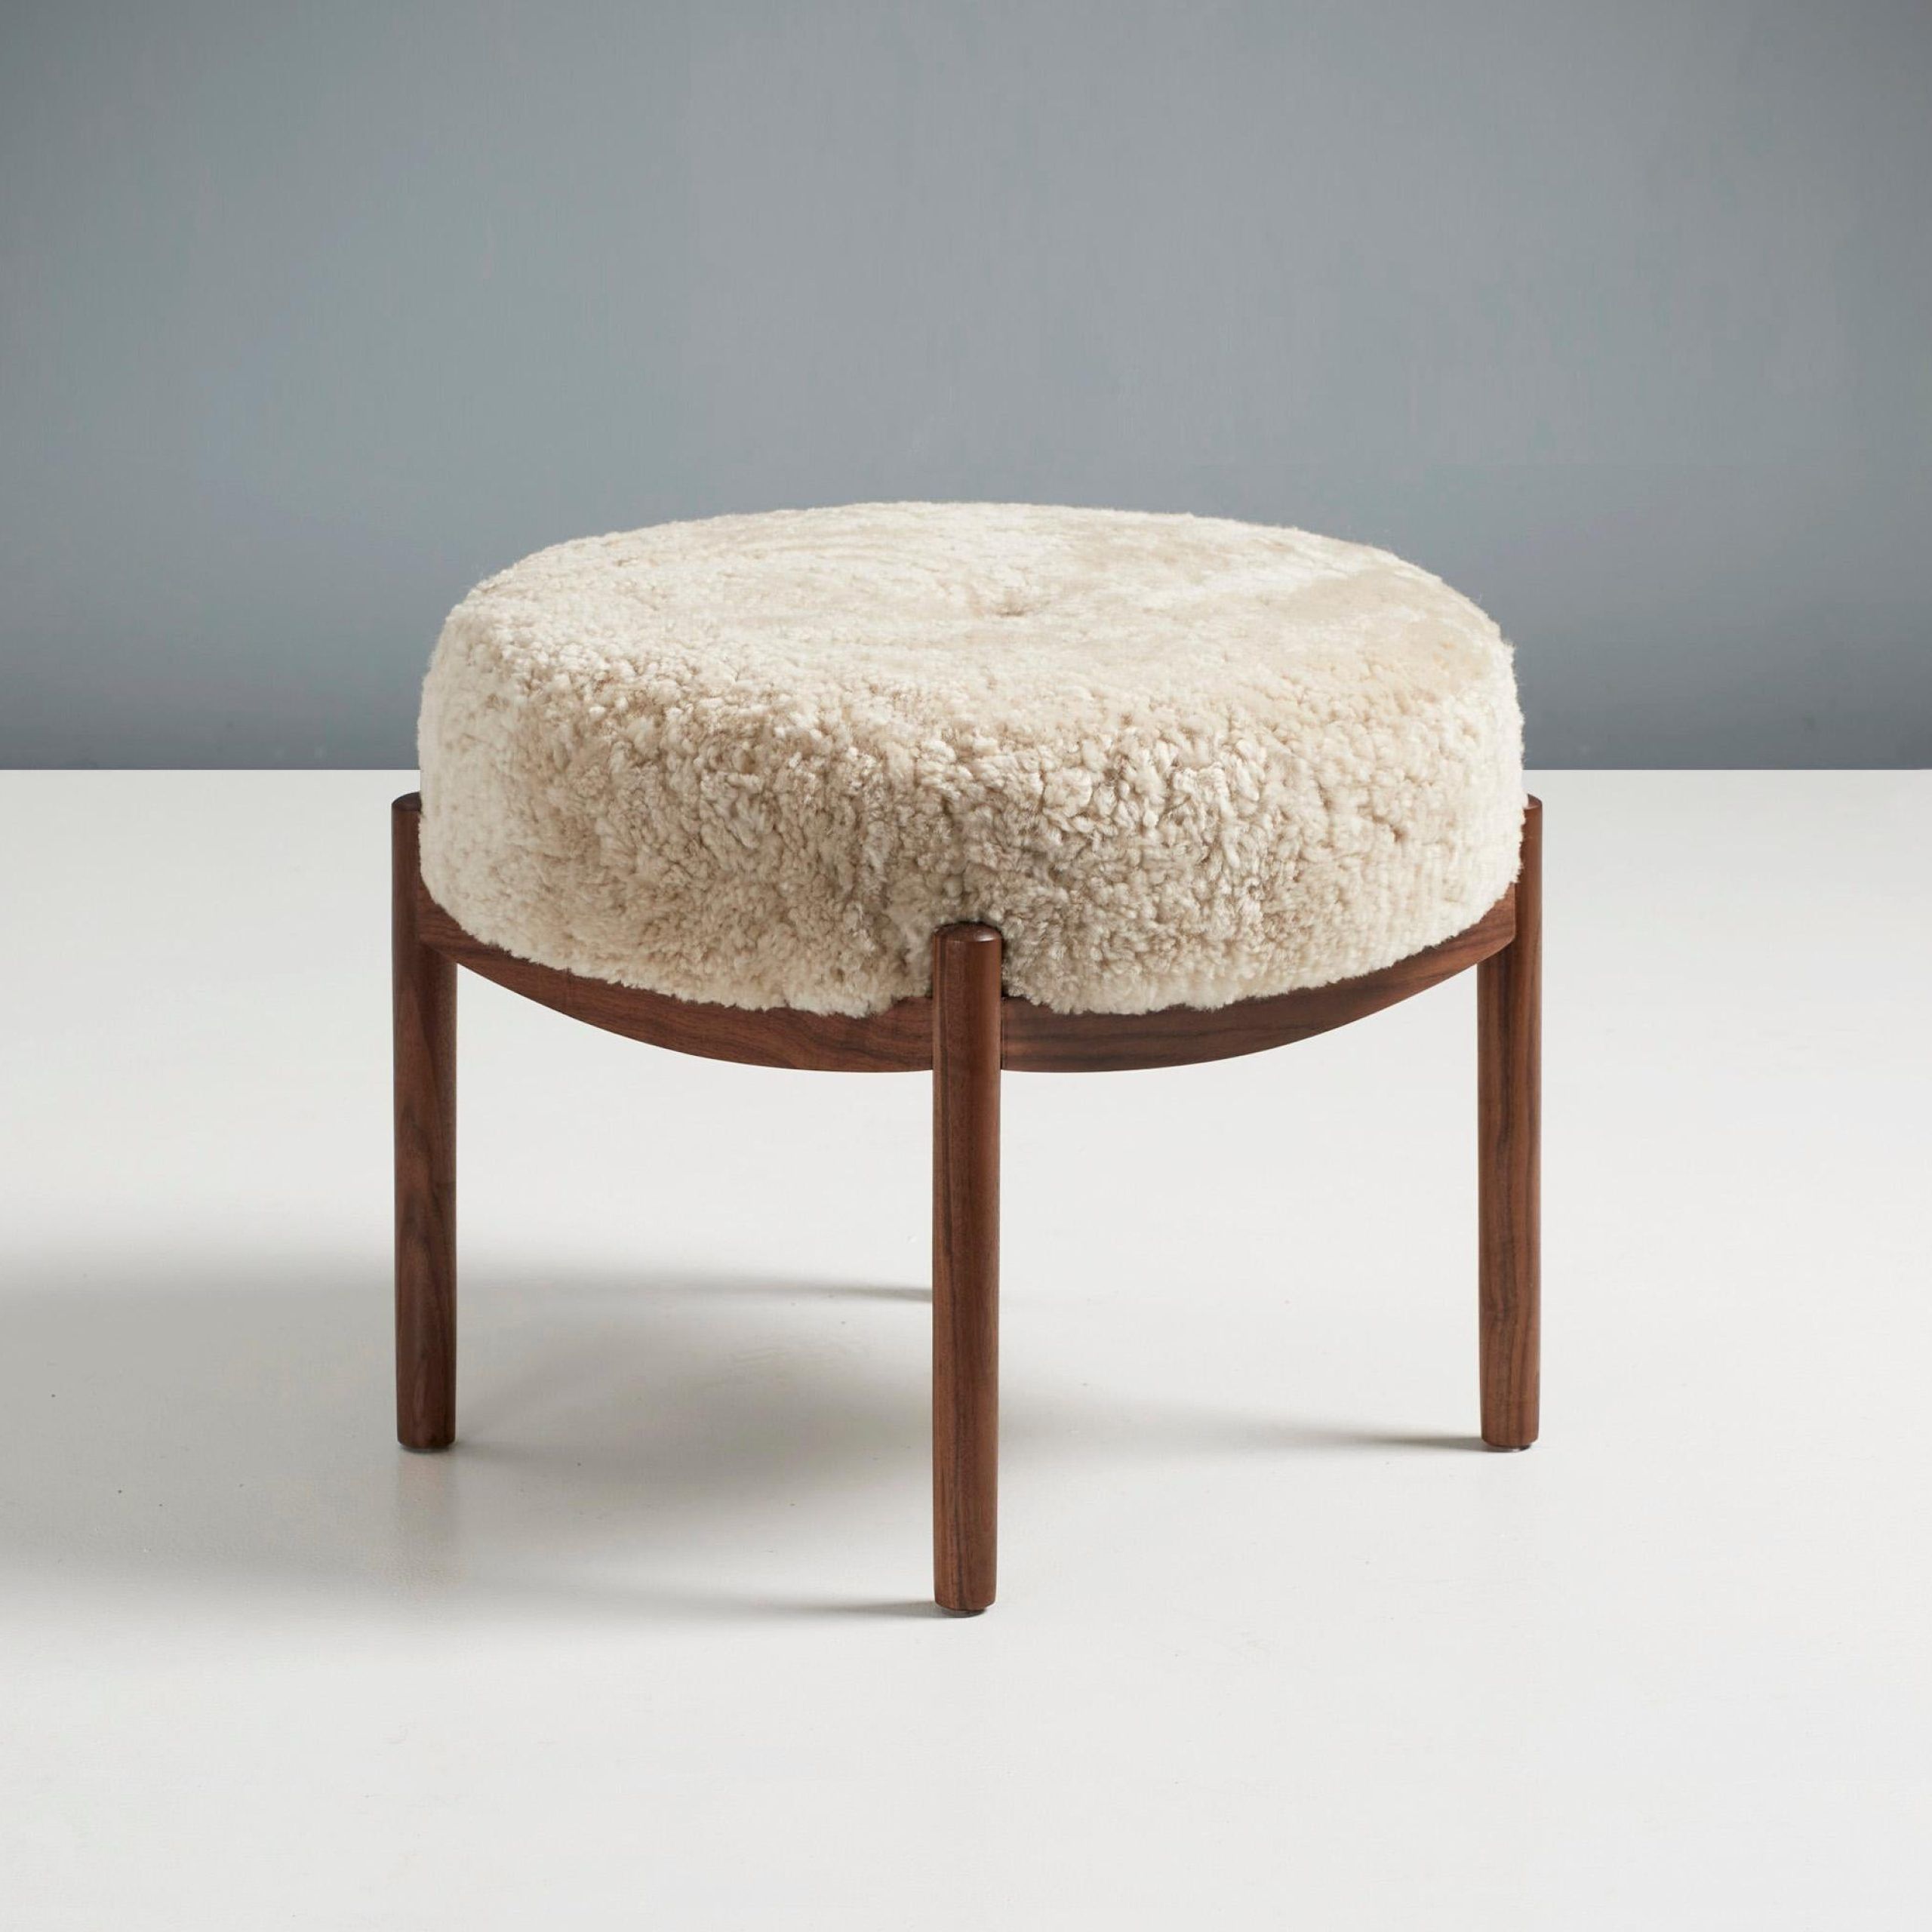 Custom Made Walnut And Shearling Round Ottoman For Sale At 1stdibs Throughout Satin Black Shearling Ottomans (View 10 of 15)